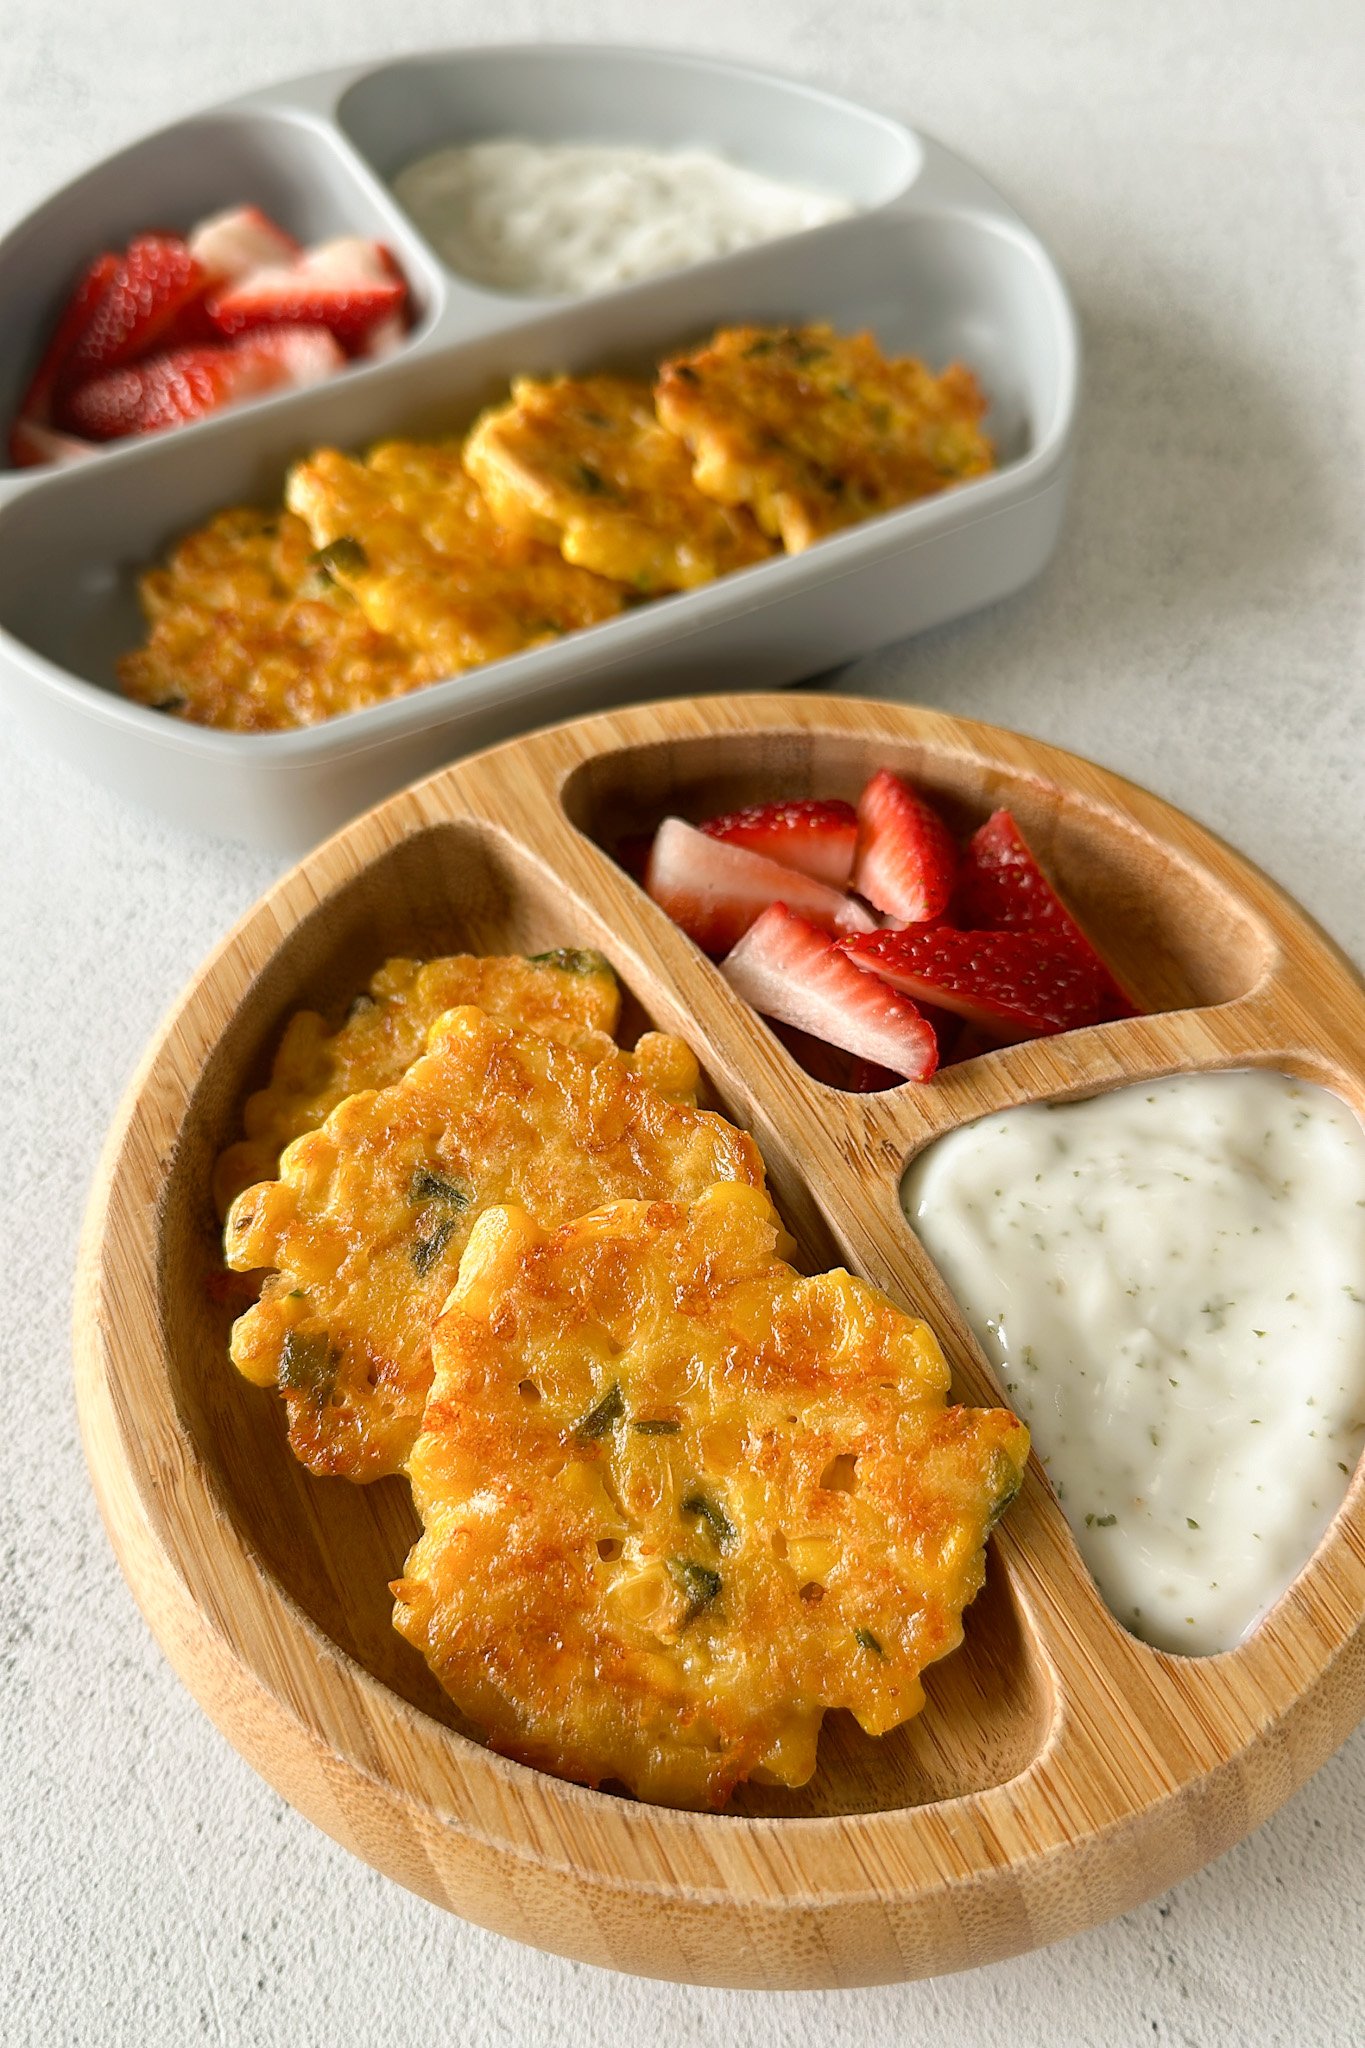 Sweet corn fritters served with strawberries and a dip.